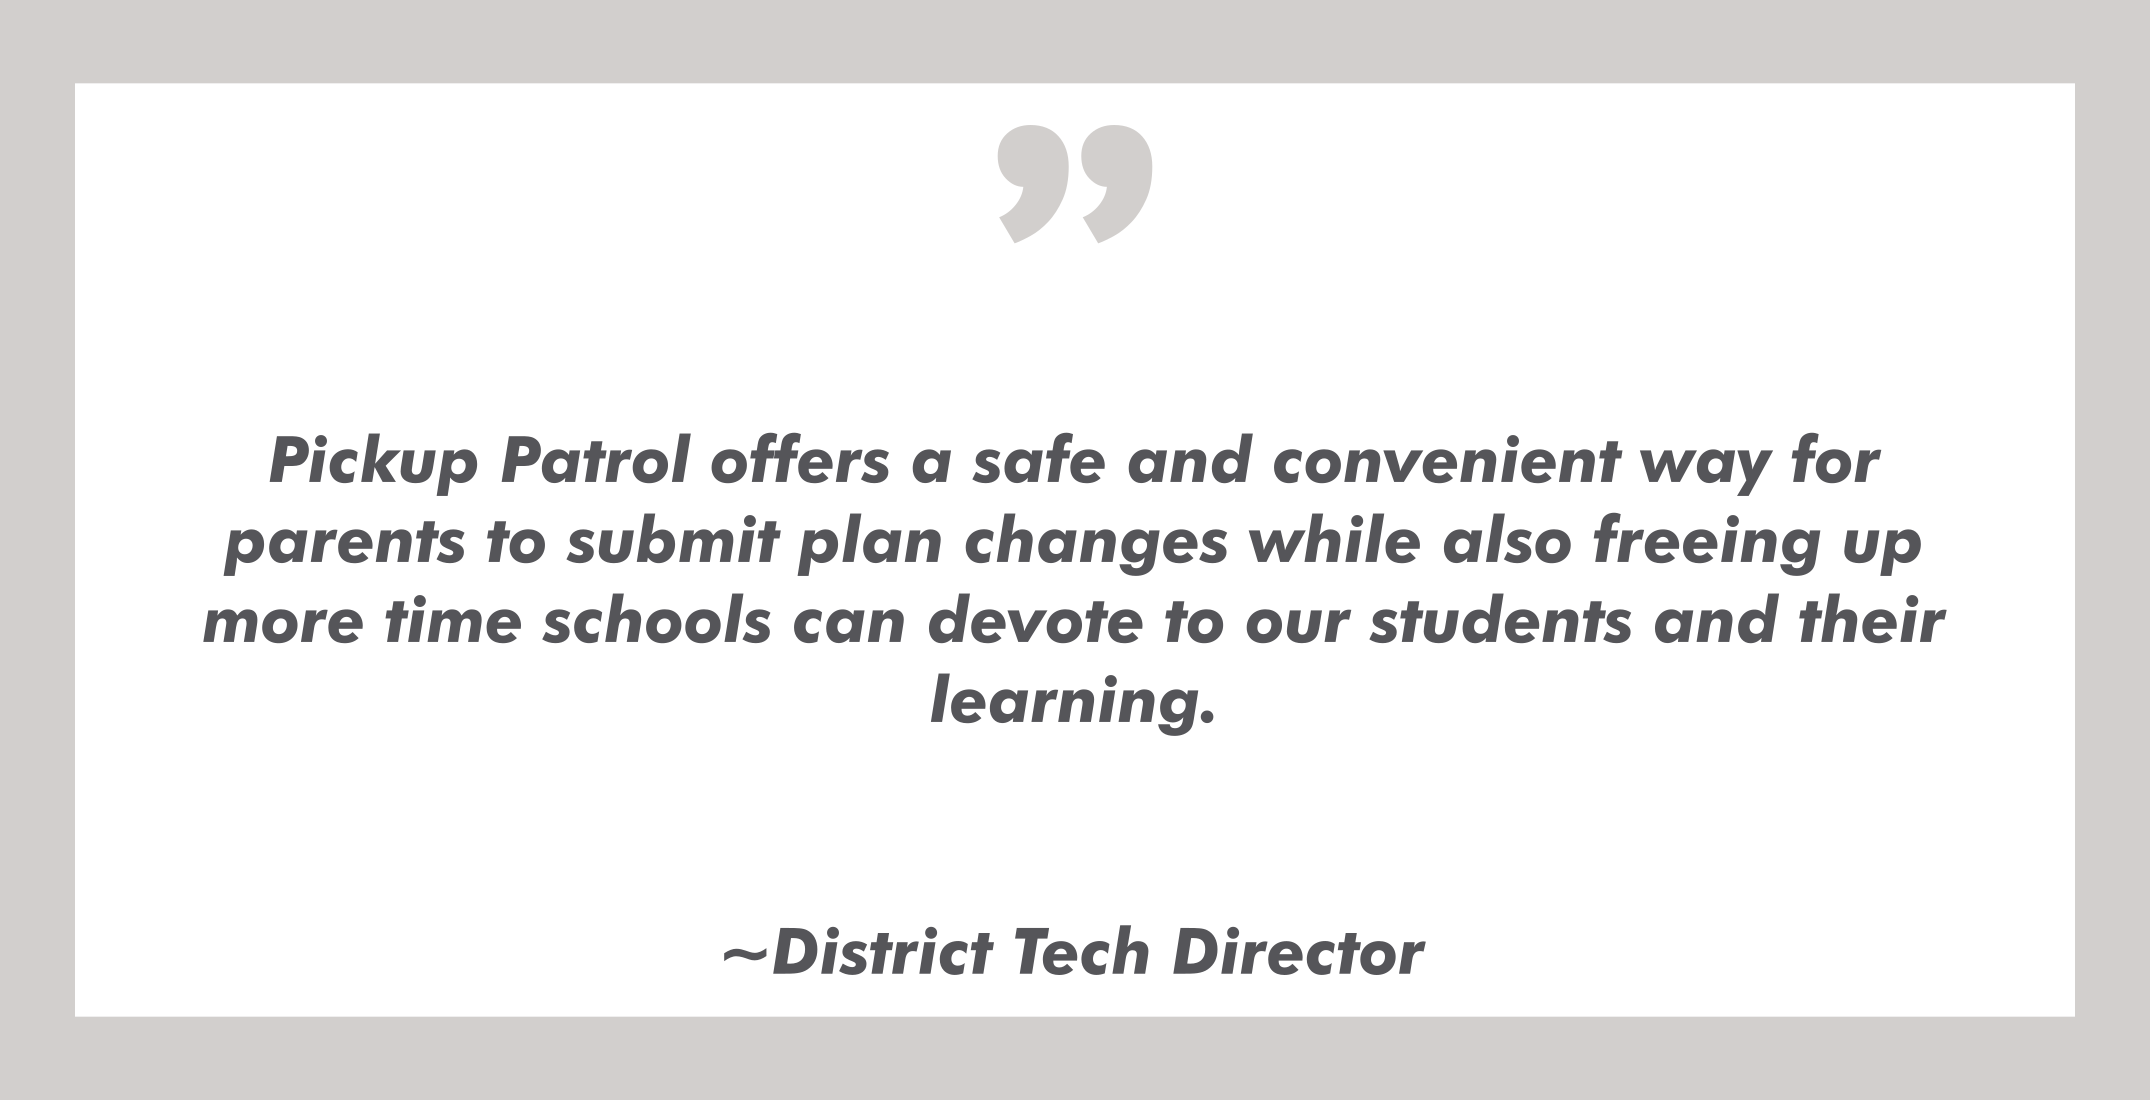 PickUp Patrol school dismissal management system testimonial from district technology director